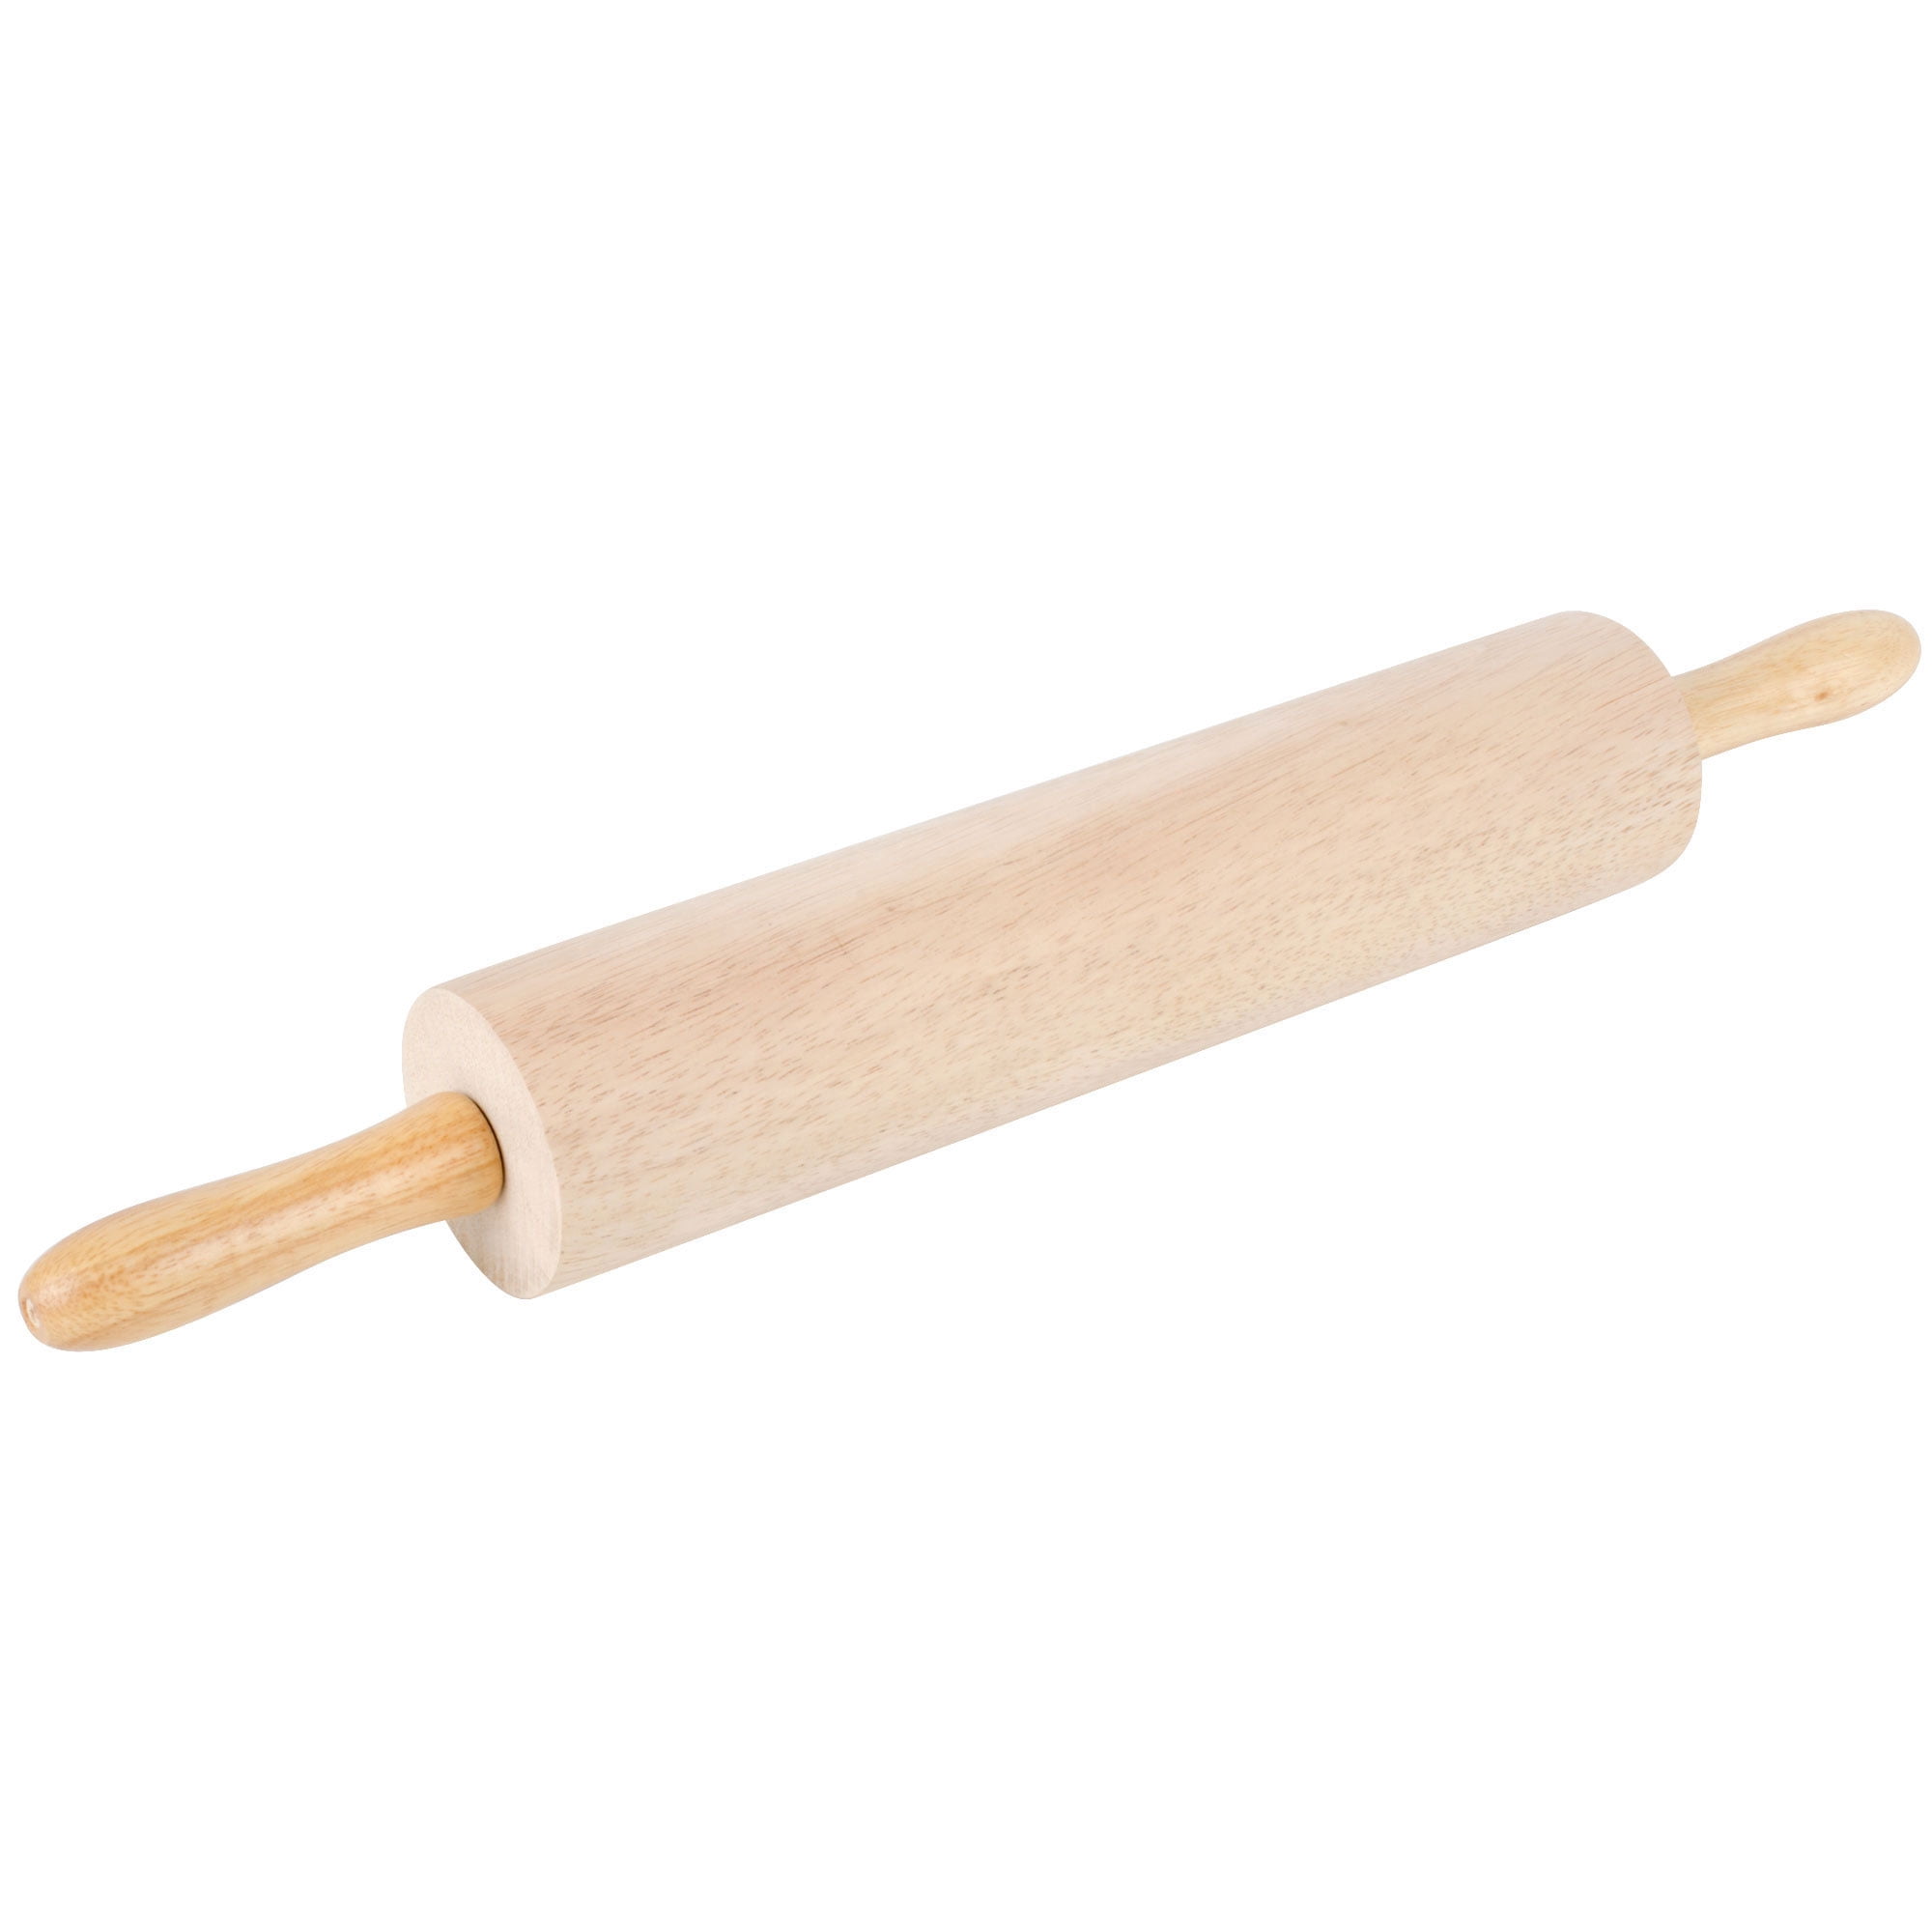 18 inches x 3-1/2 inches Commercial Hardwood Rolling Pin Professional Grade 